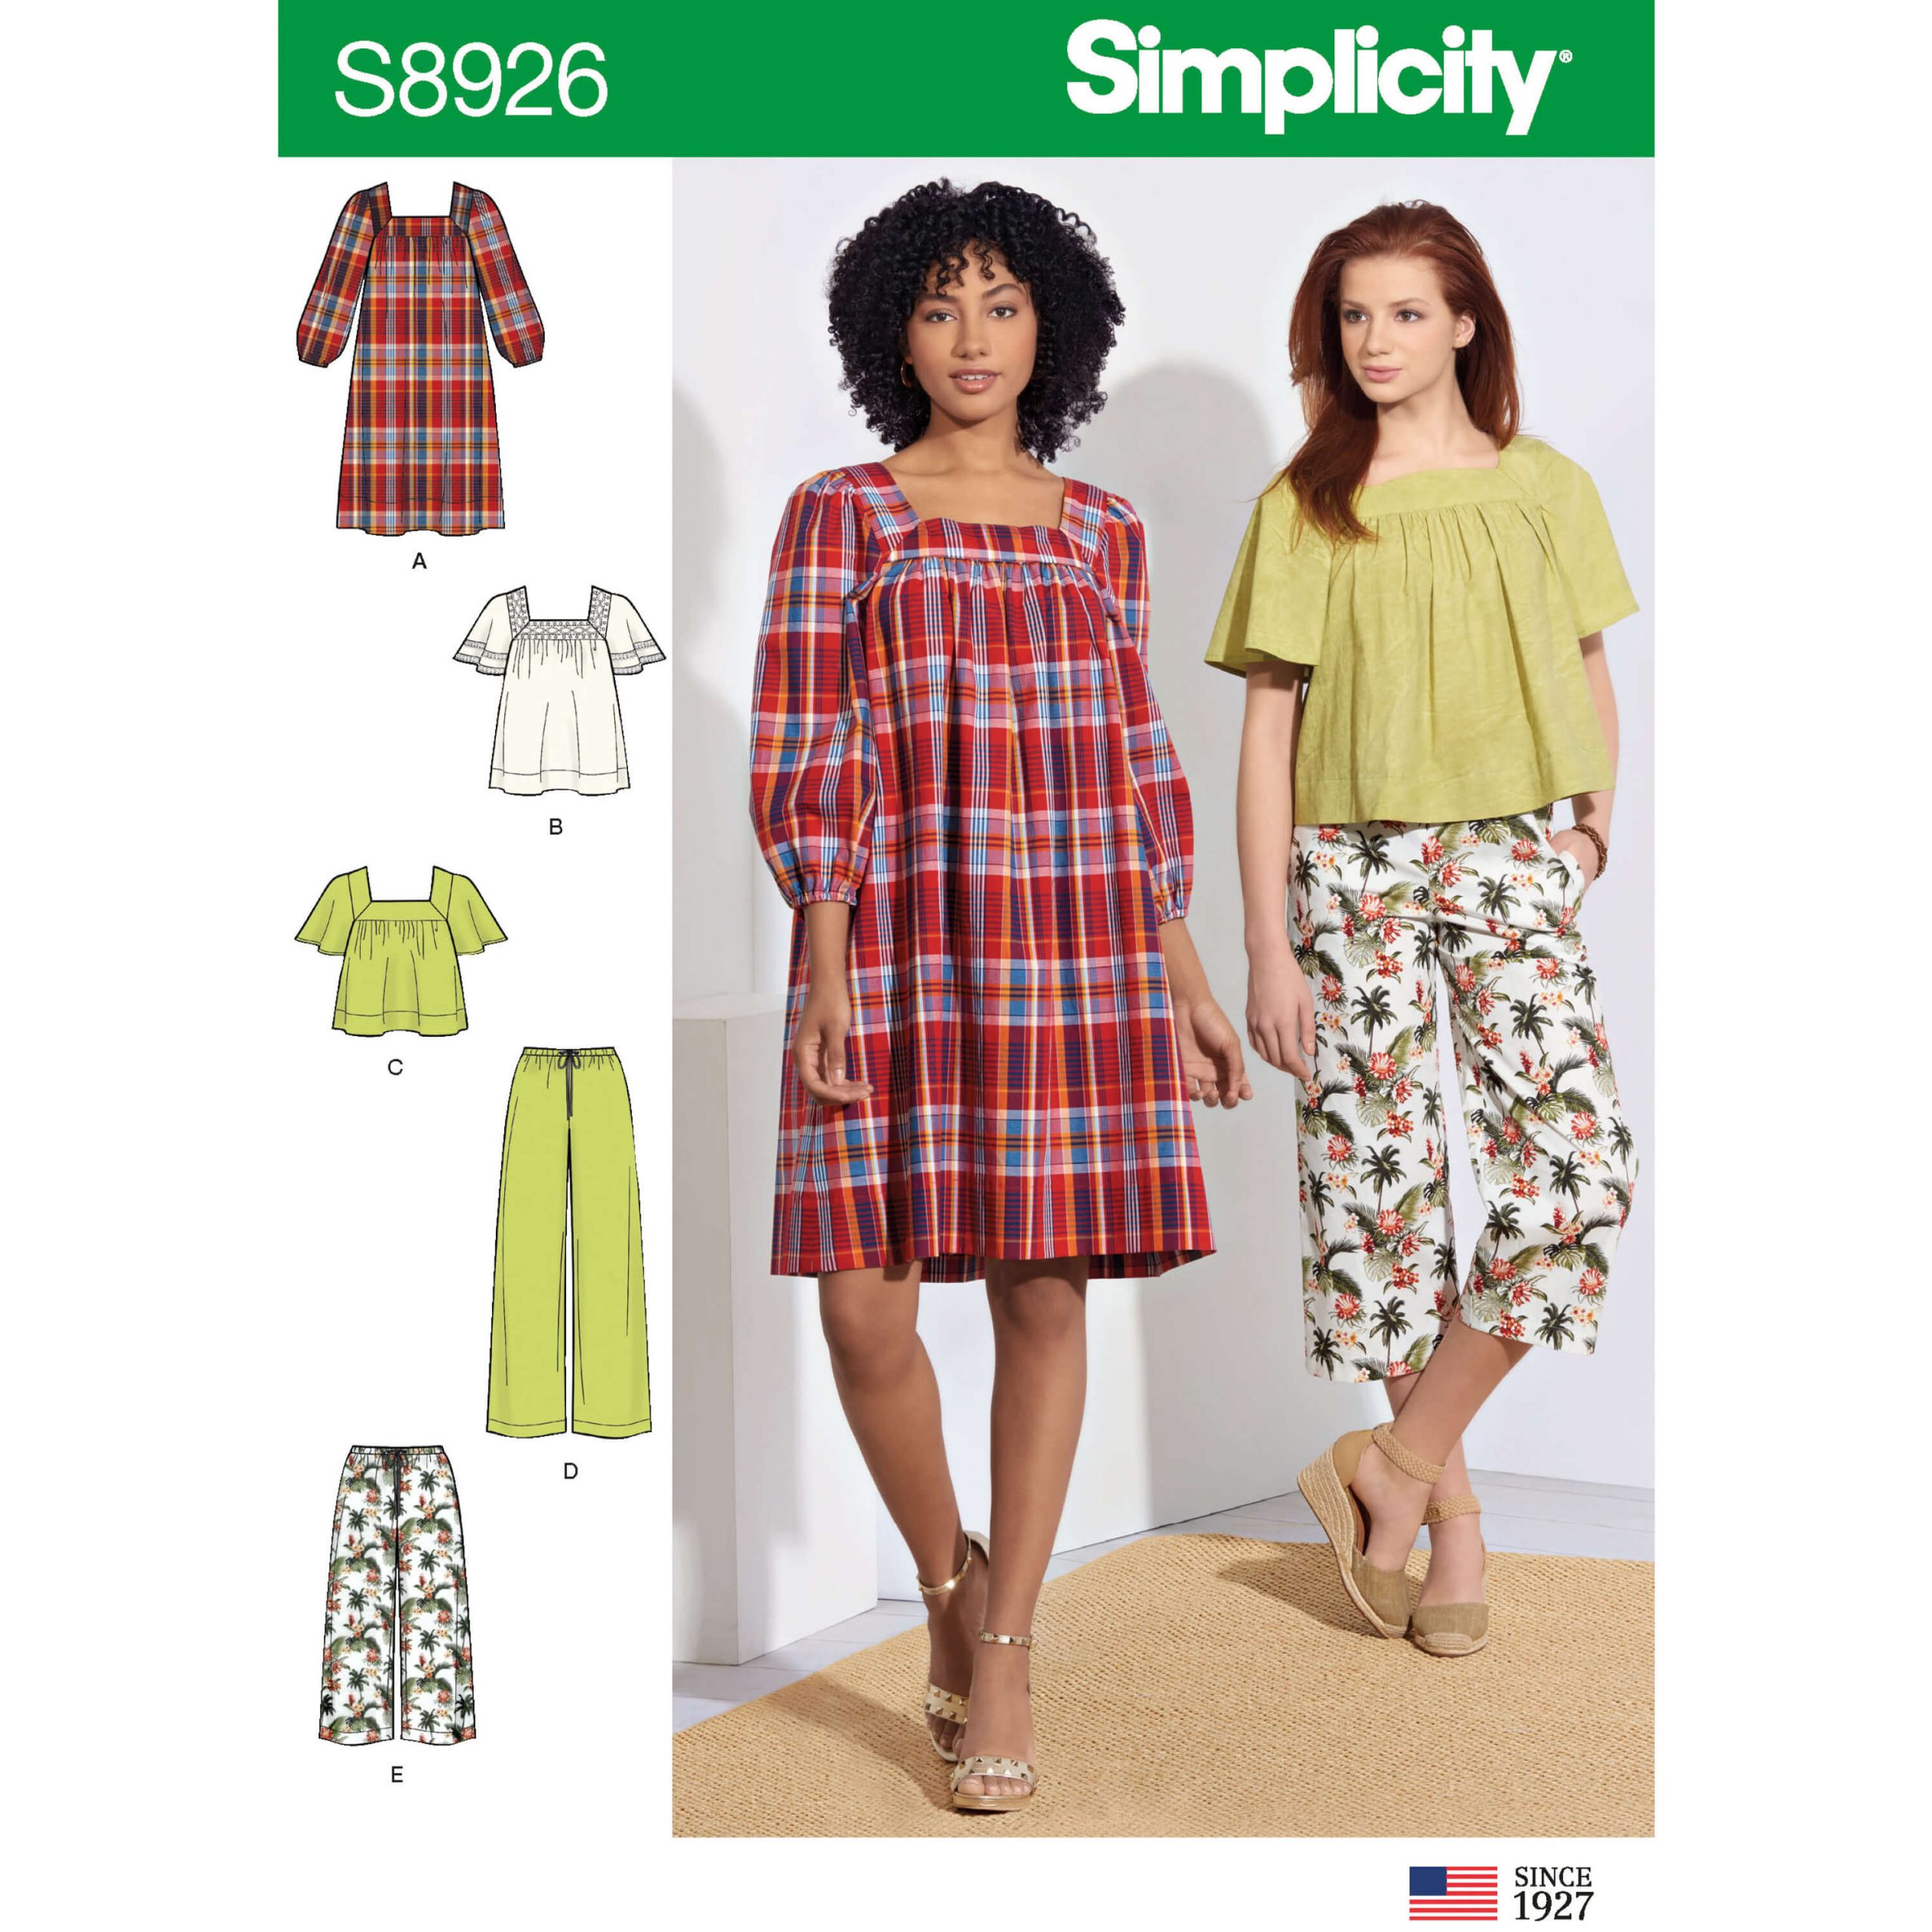 Simplicity Sewing Pattern S8926 Misses' Dress, Tops, and Trousers